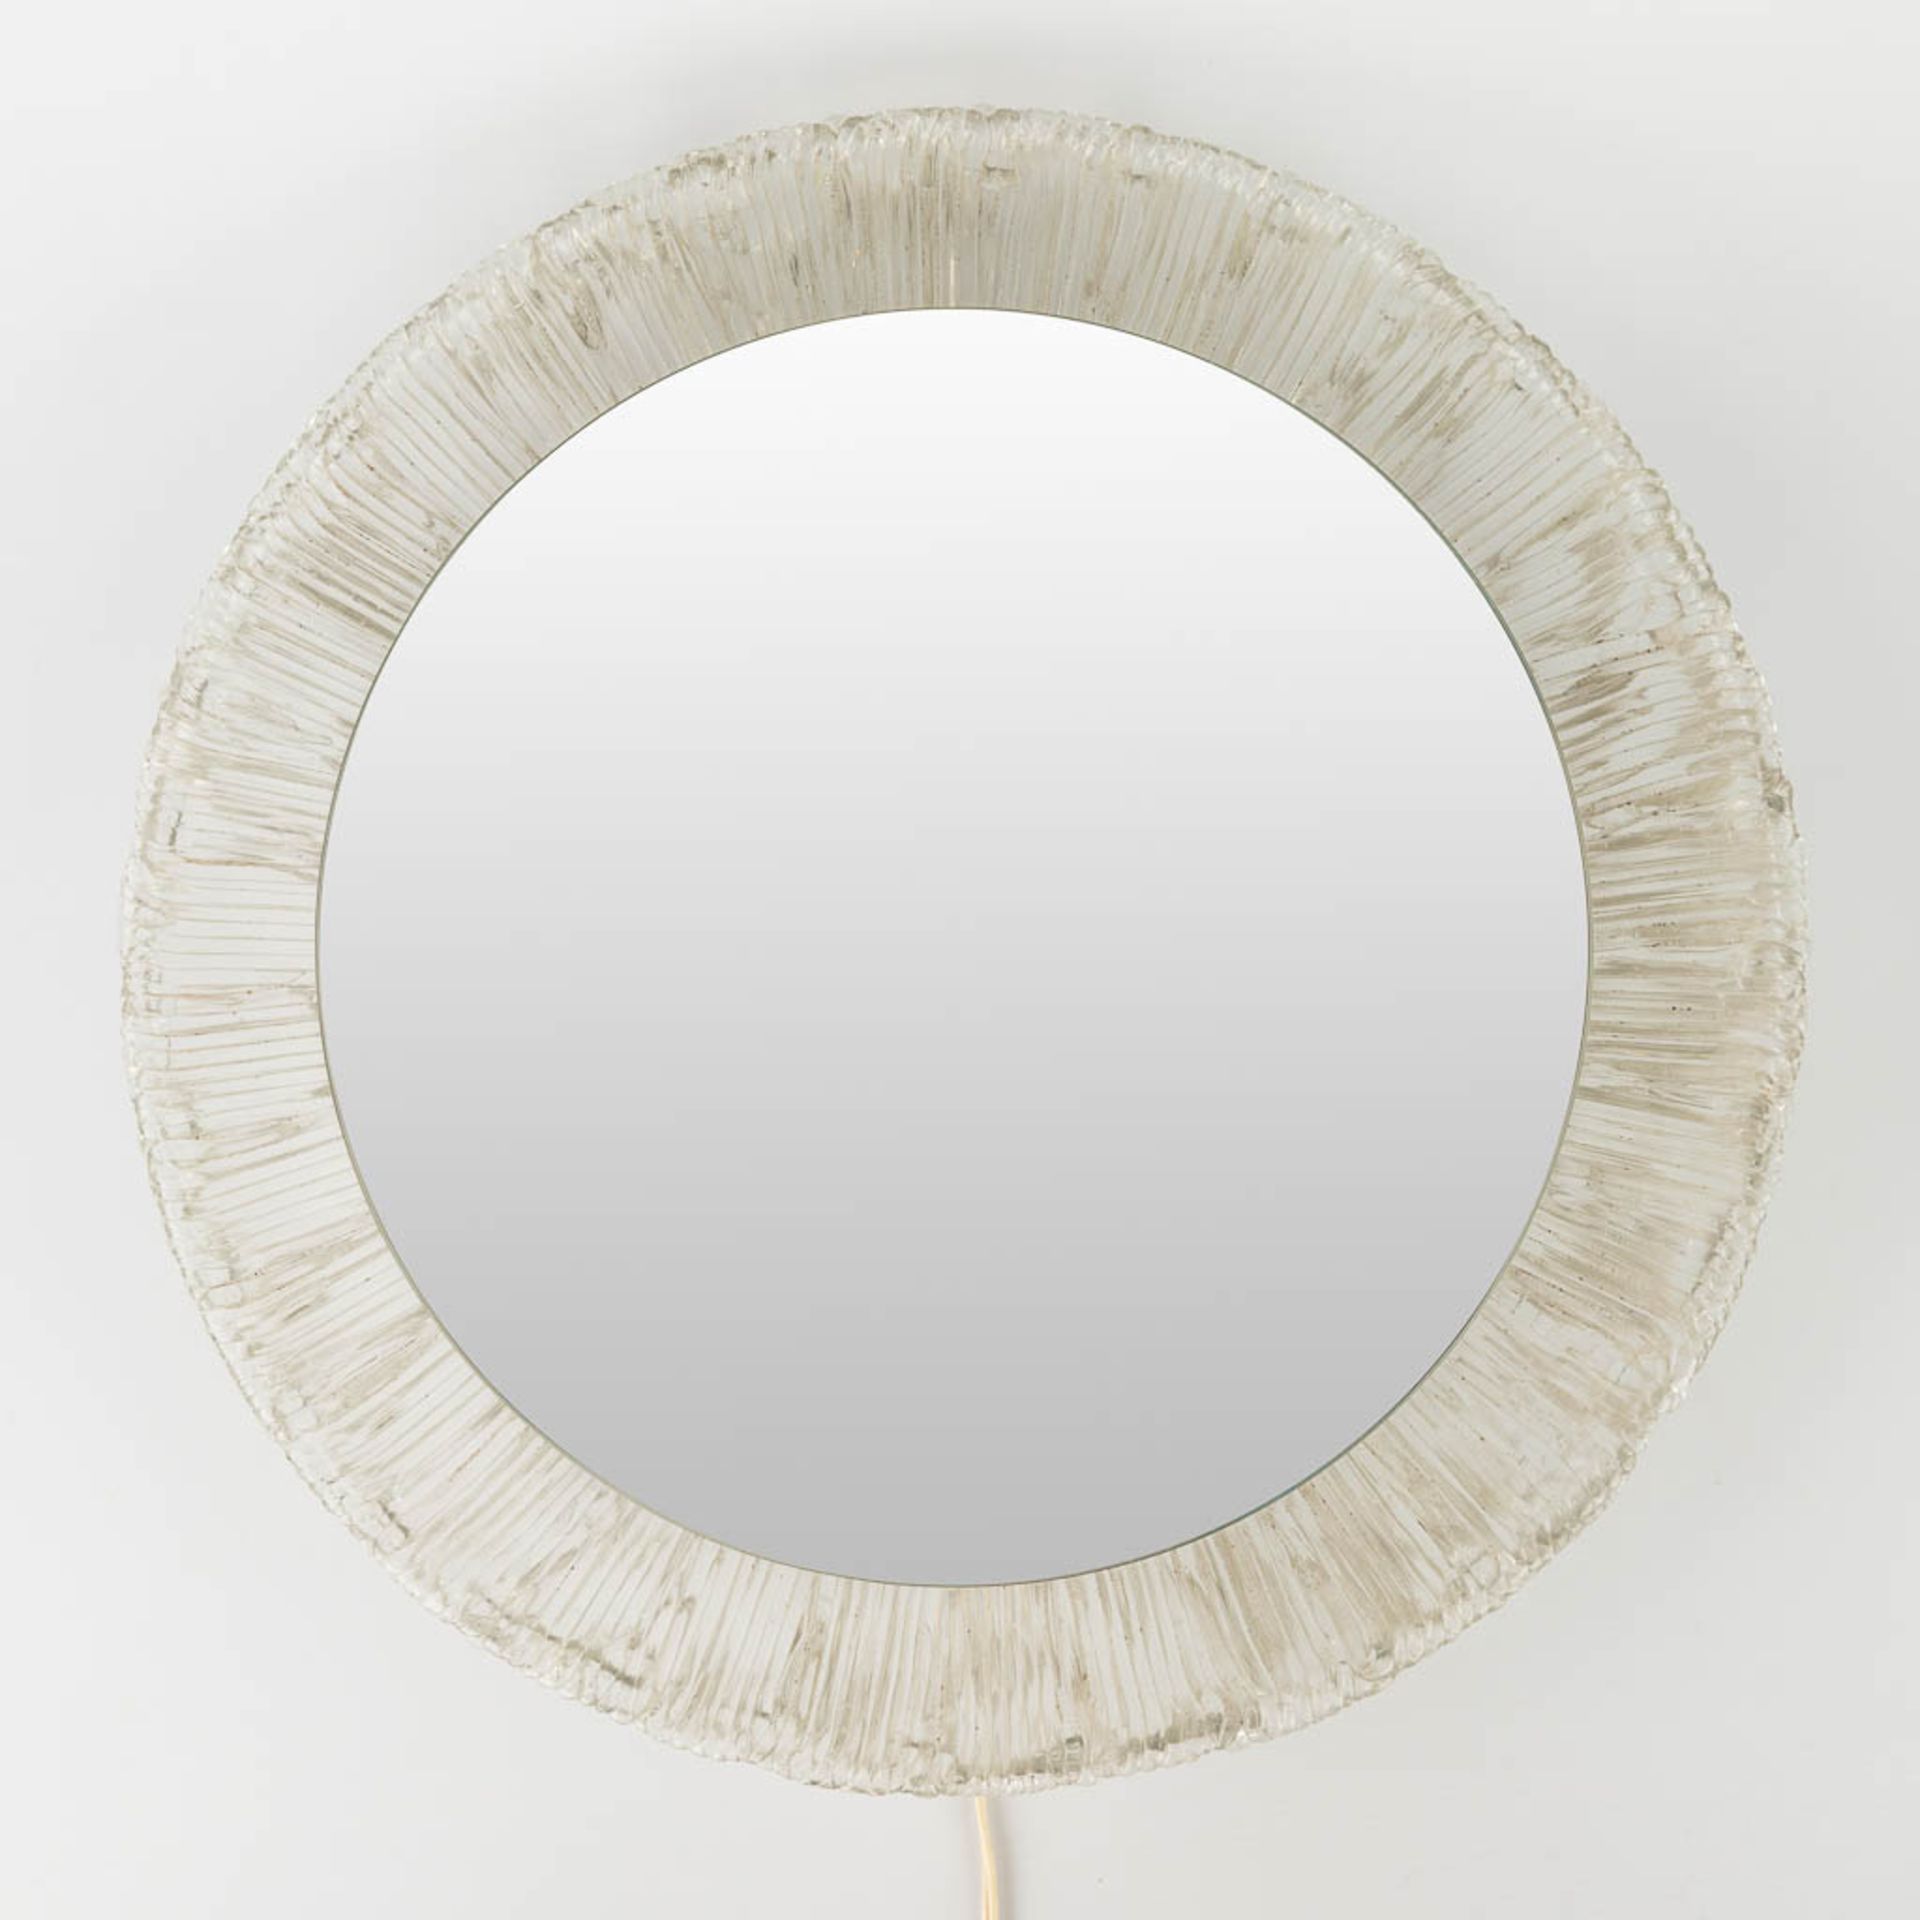 Egon HILLEBRAND (XX-XXI) Wall lamp with mirror, acrylic and glass. (D: 47 cm) - Image 4 of 8